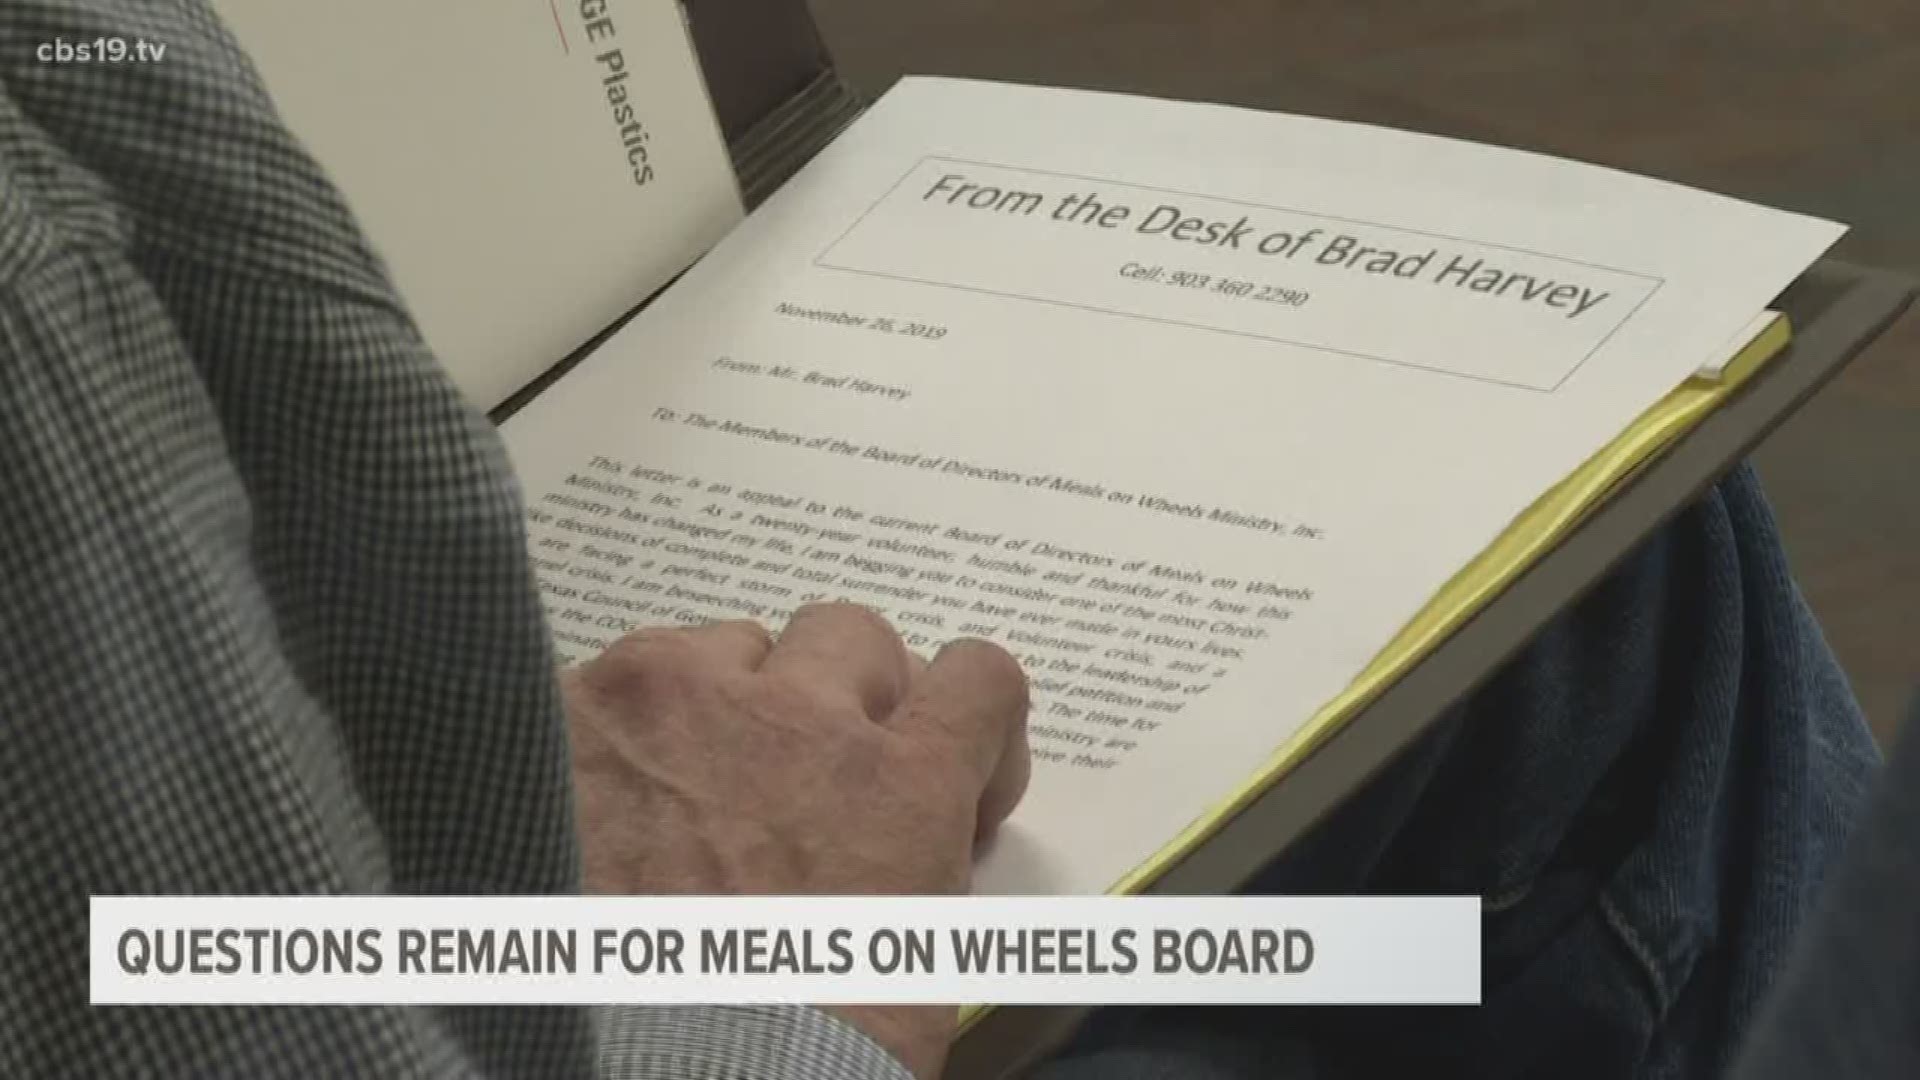 Almost a week after John Moore the former CEO of Meals on Wheels submitted his resignation, volunteers are calling for a change in leadership at the top.